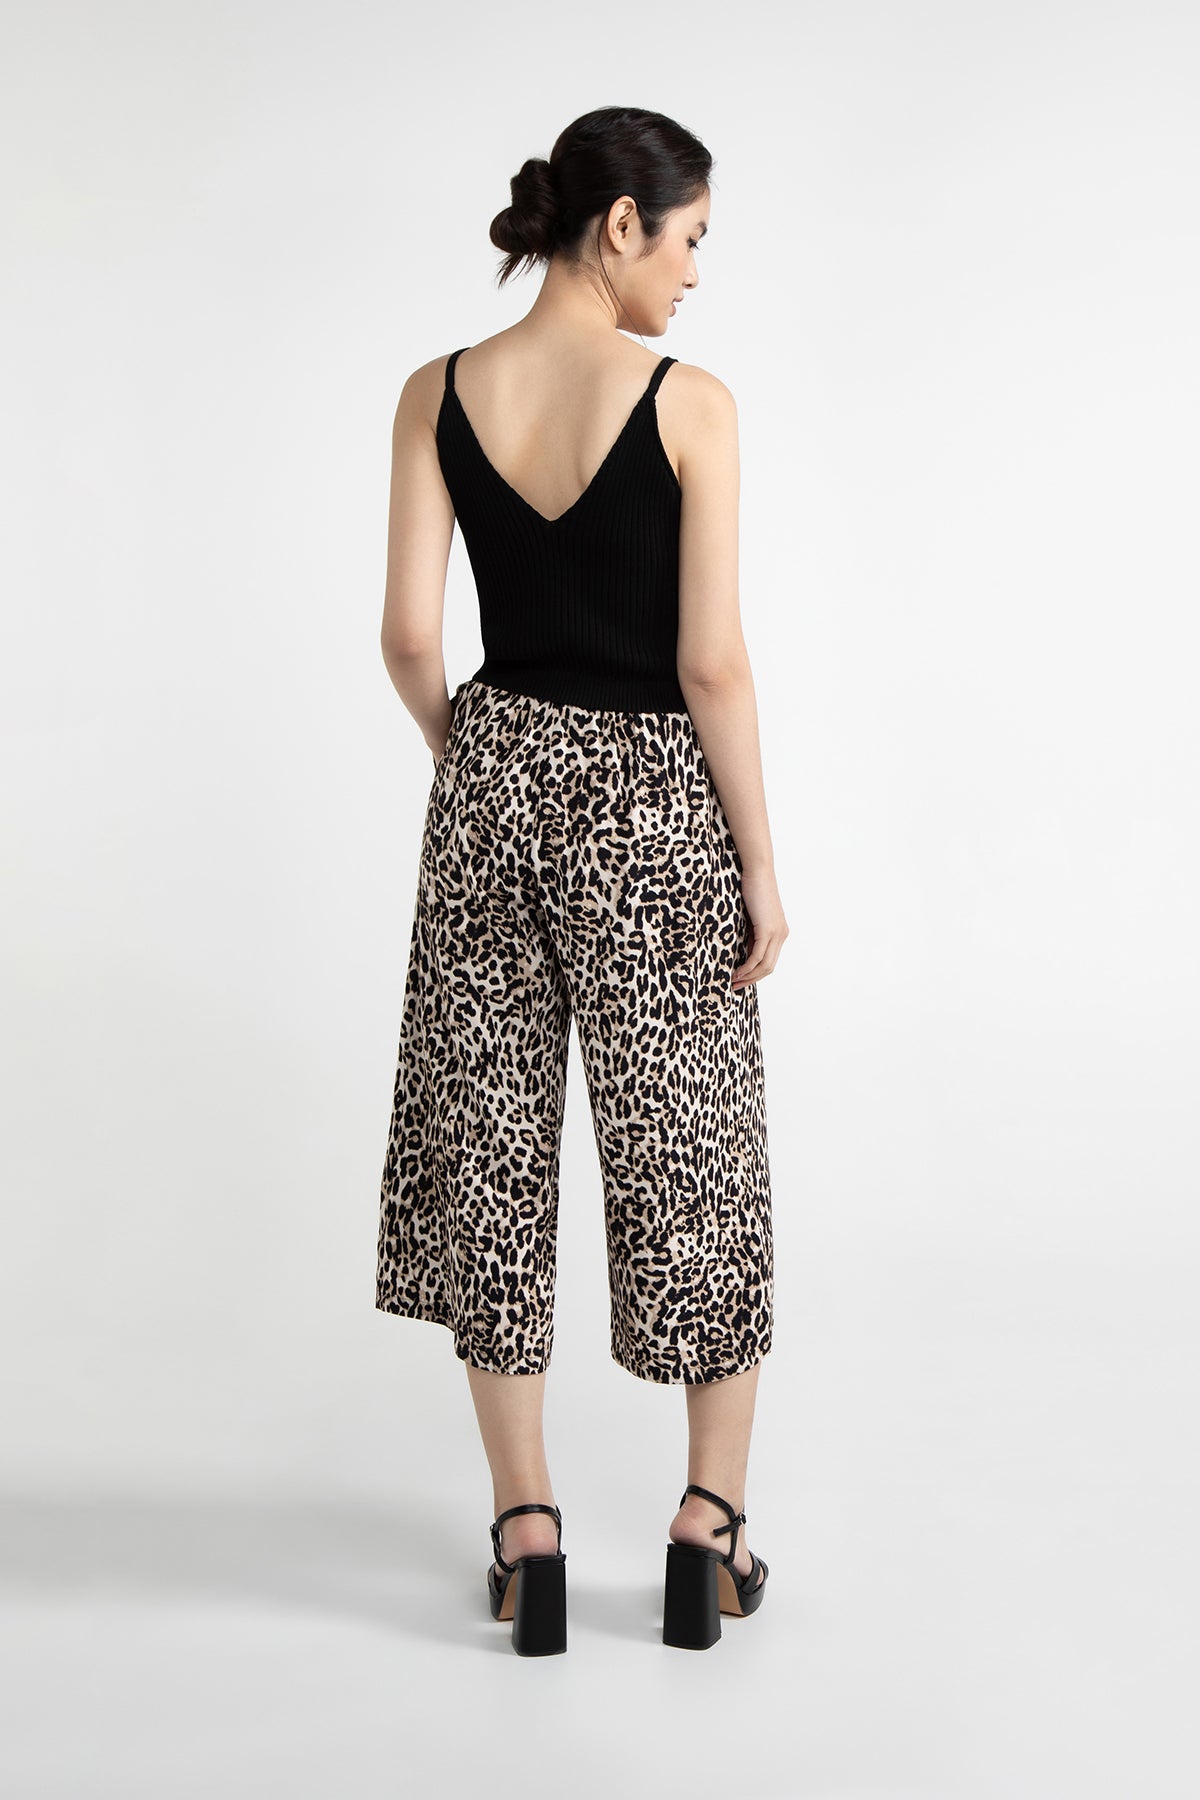 TAVIRA trousers in Leo Jacquard by LOVJOI made of Cupro and Ecovero™